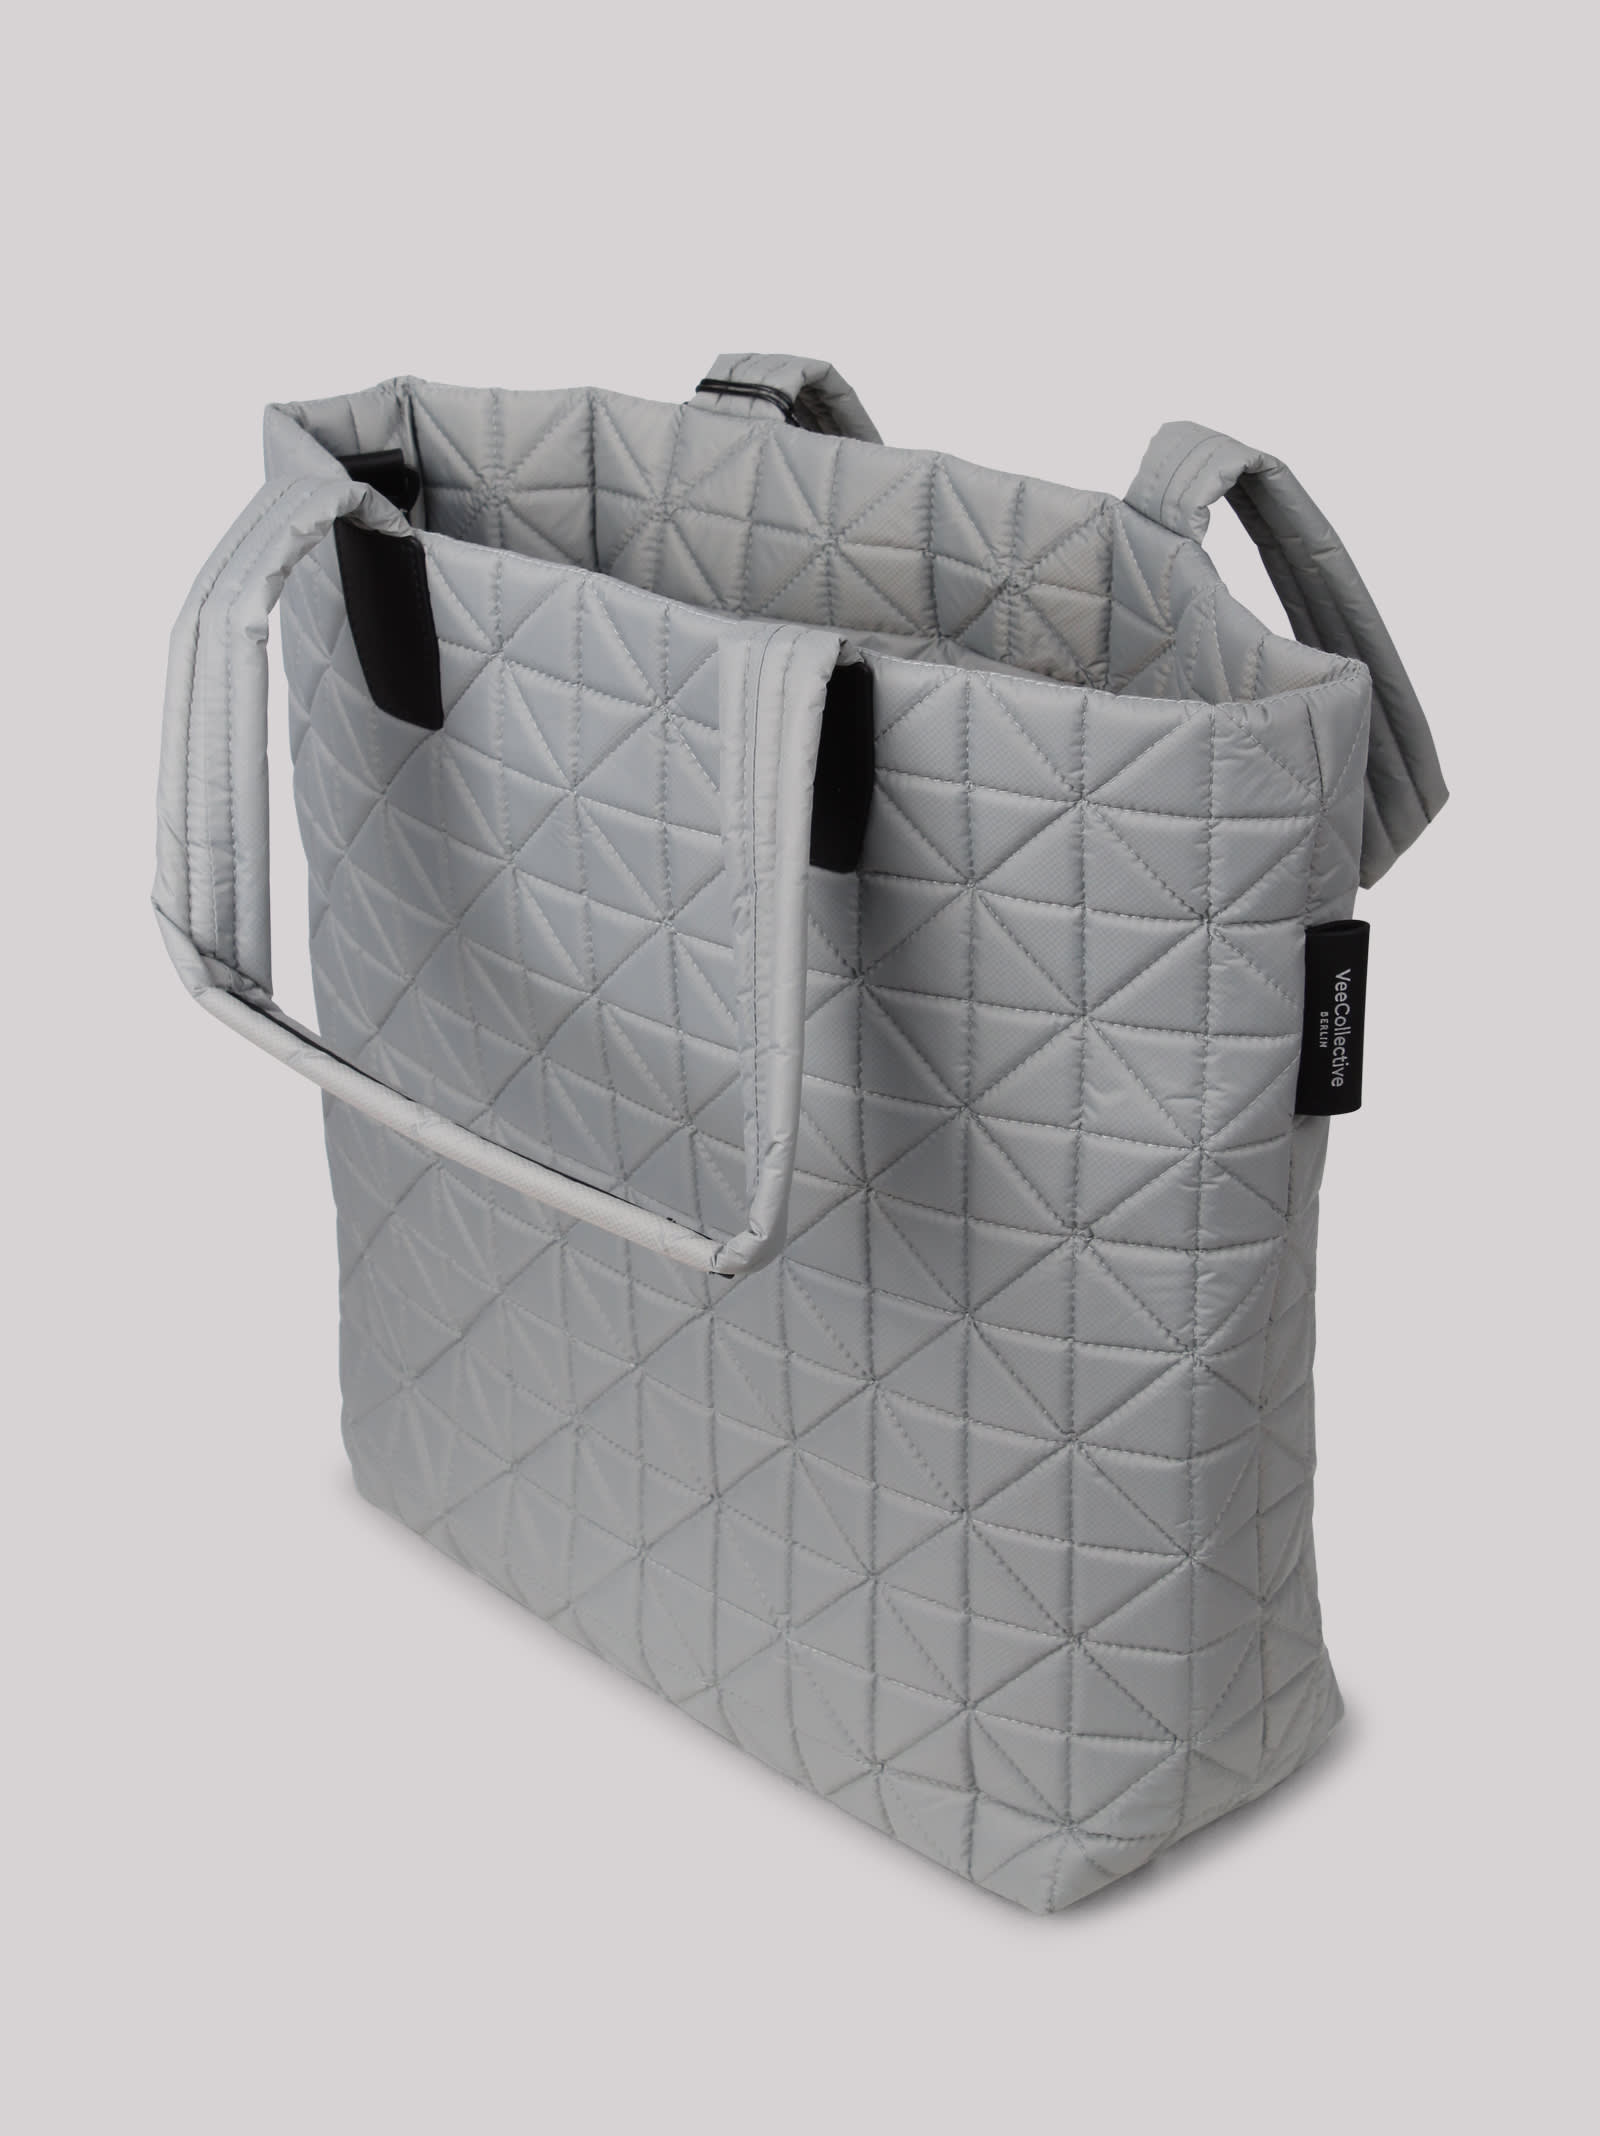 Shop Veecollective Vee Collective Large Vee Geometric Tote Bag